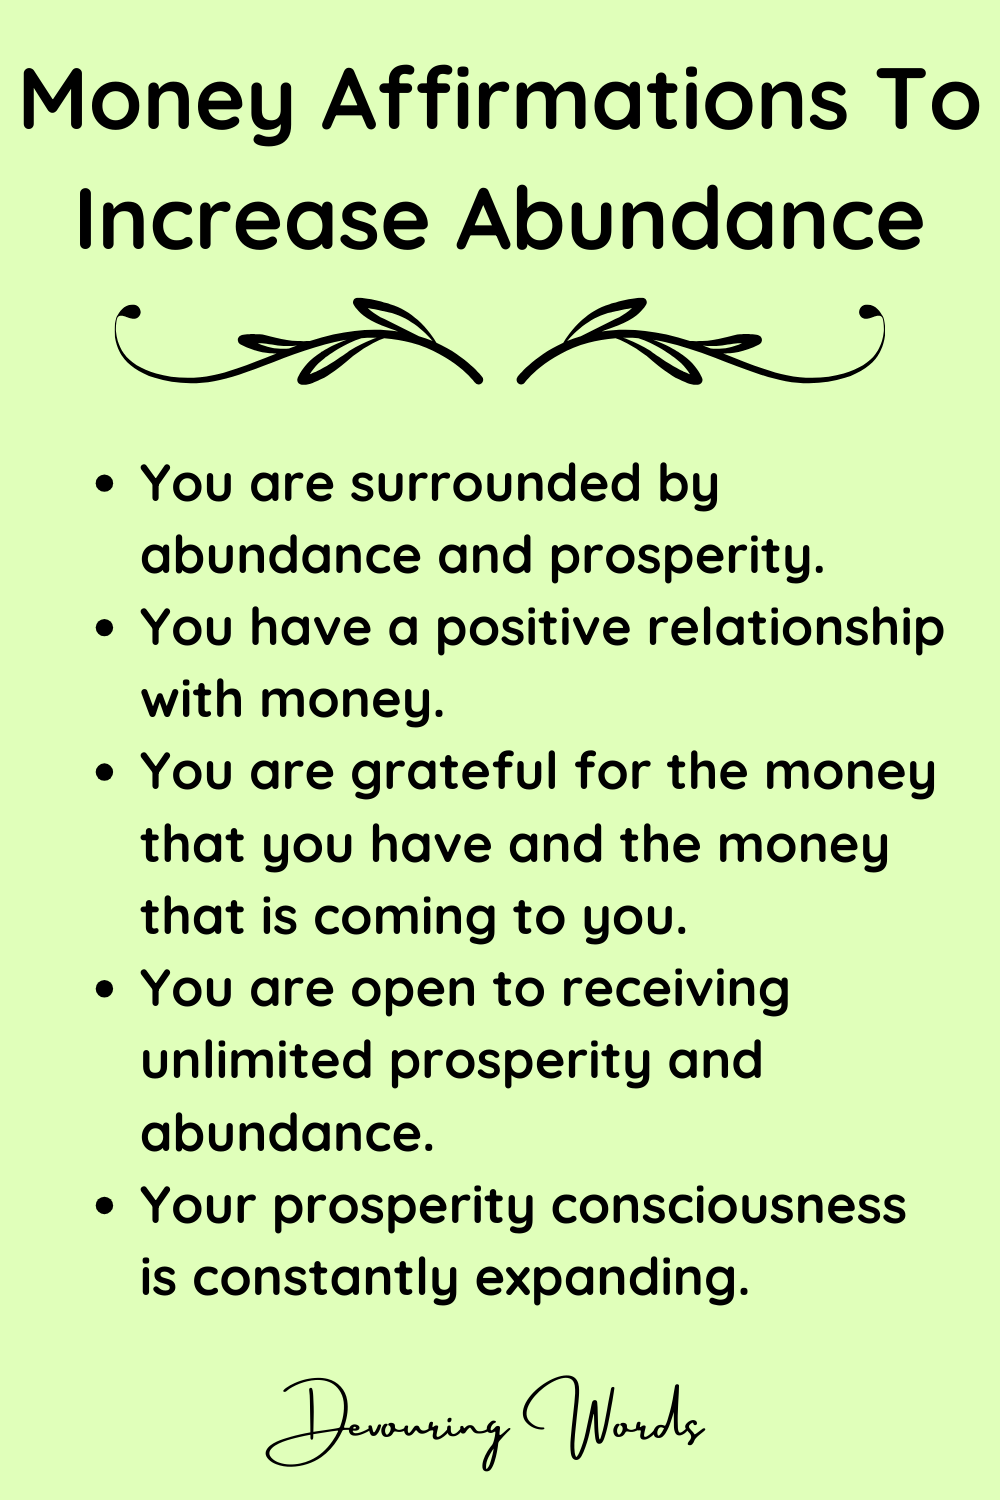 affirmations for money
